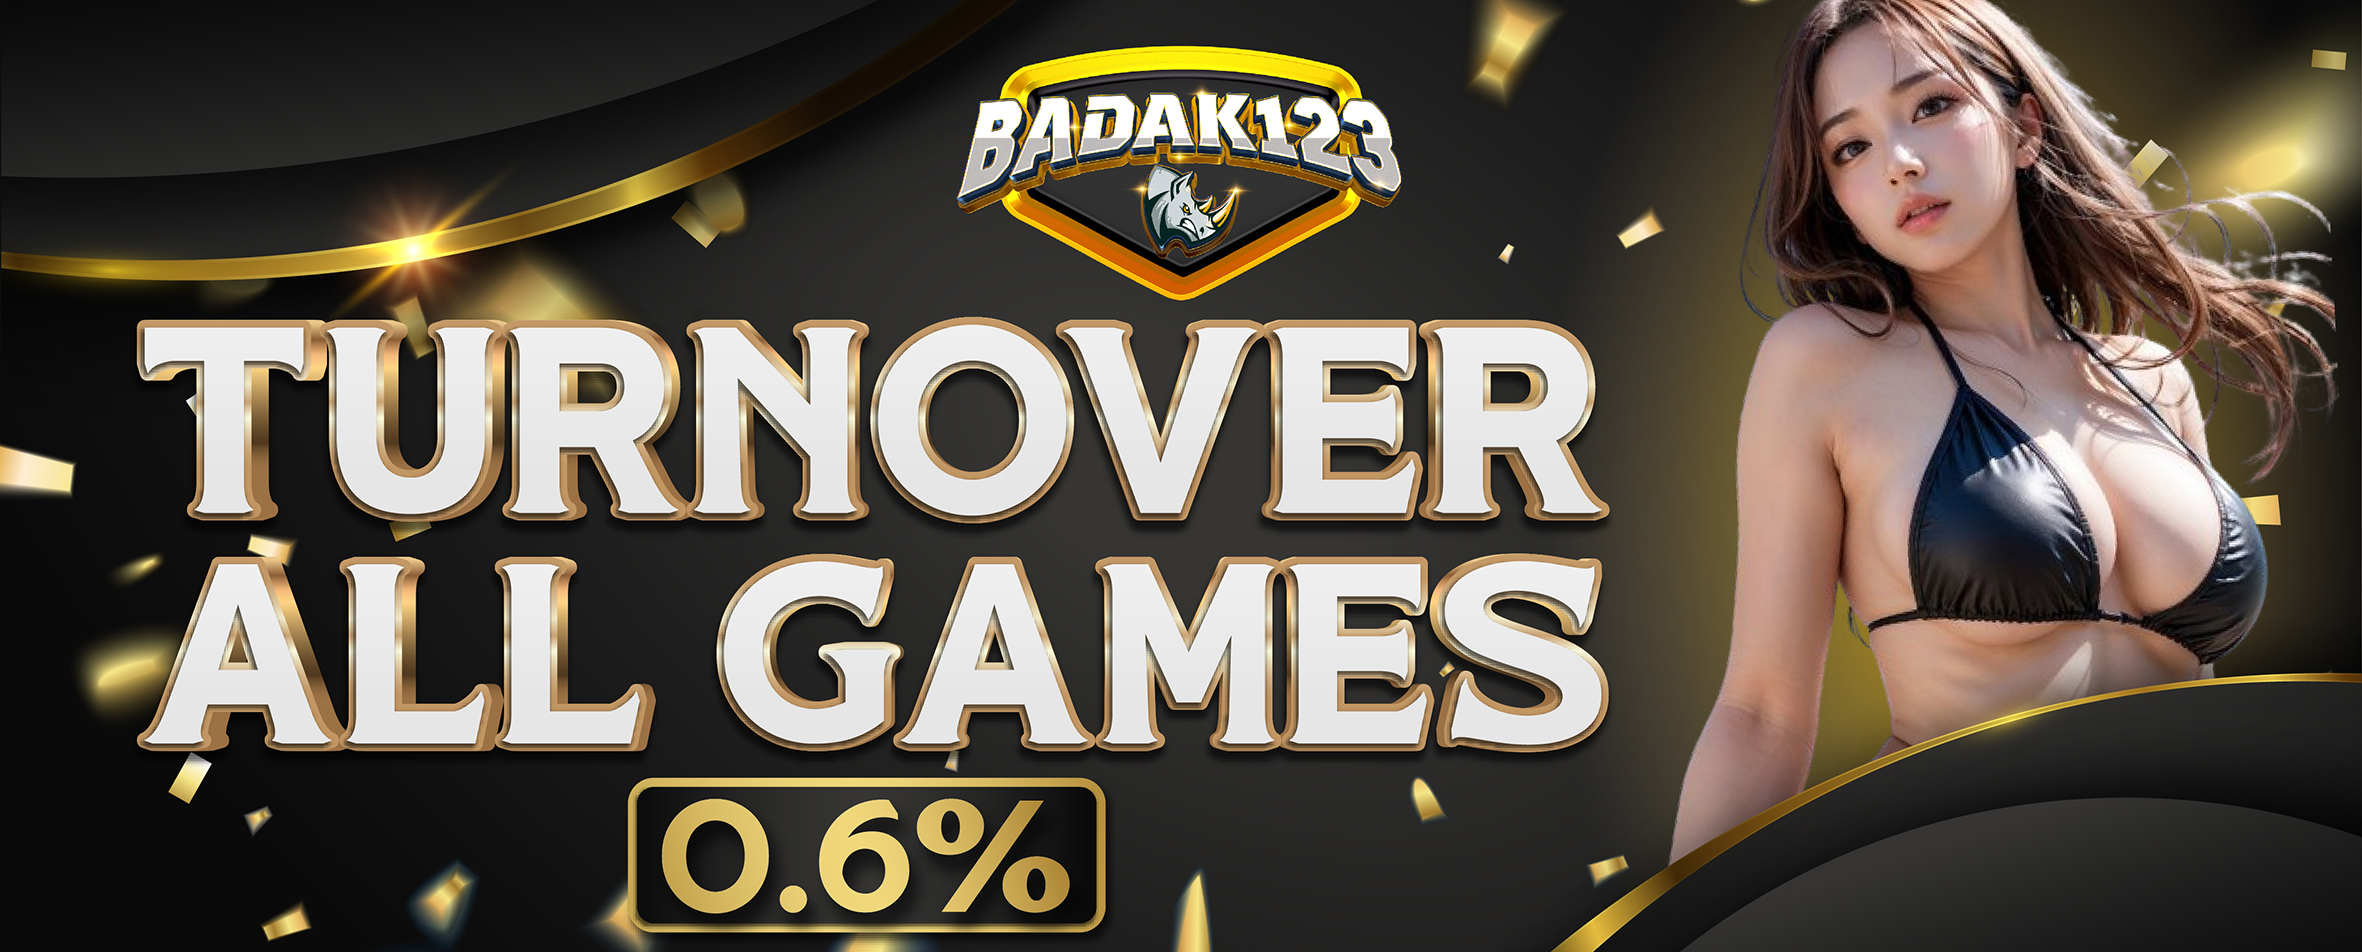 TURNOVER ALL GAMES 0.6%